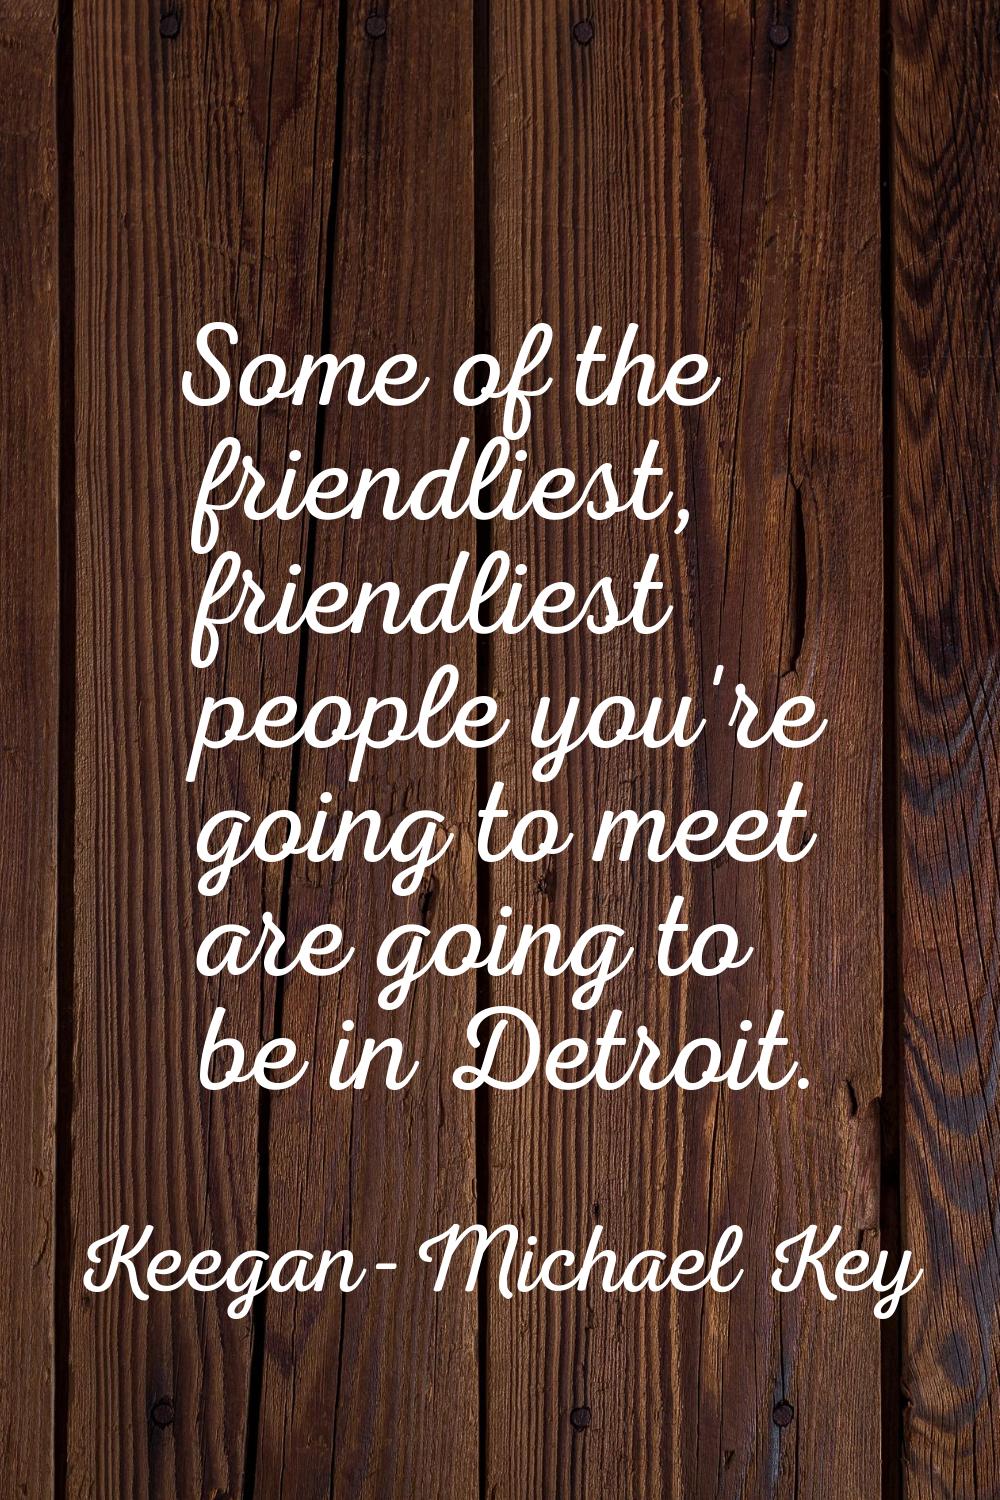 Some of the friendliest, friendliest people you're going to meet are going to be in Detroit.